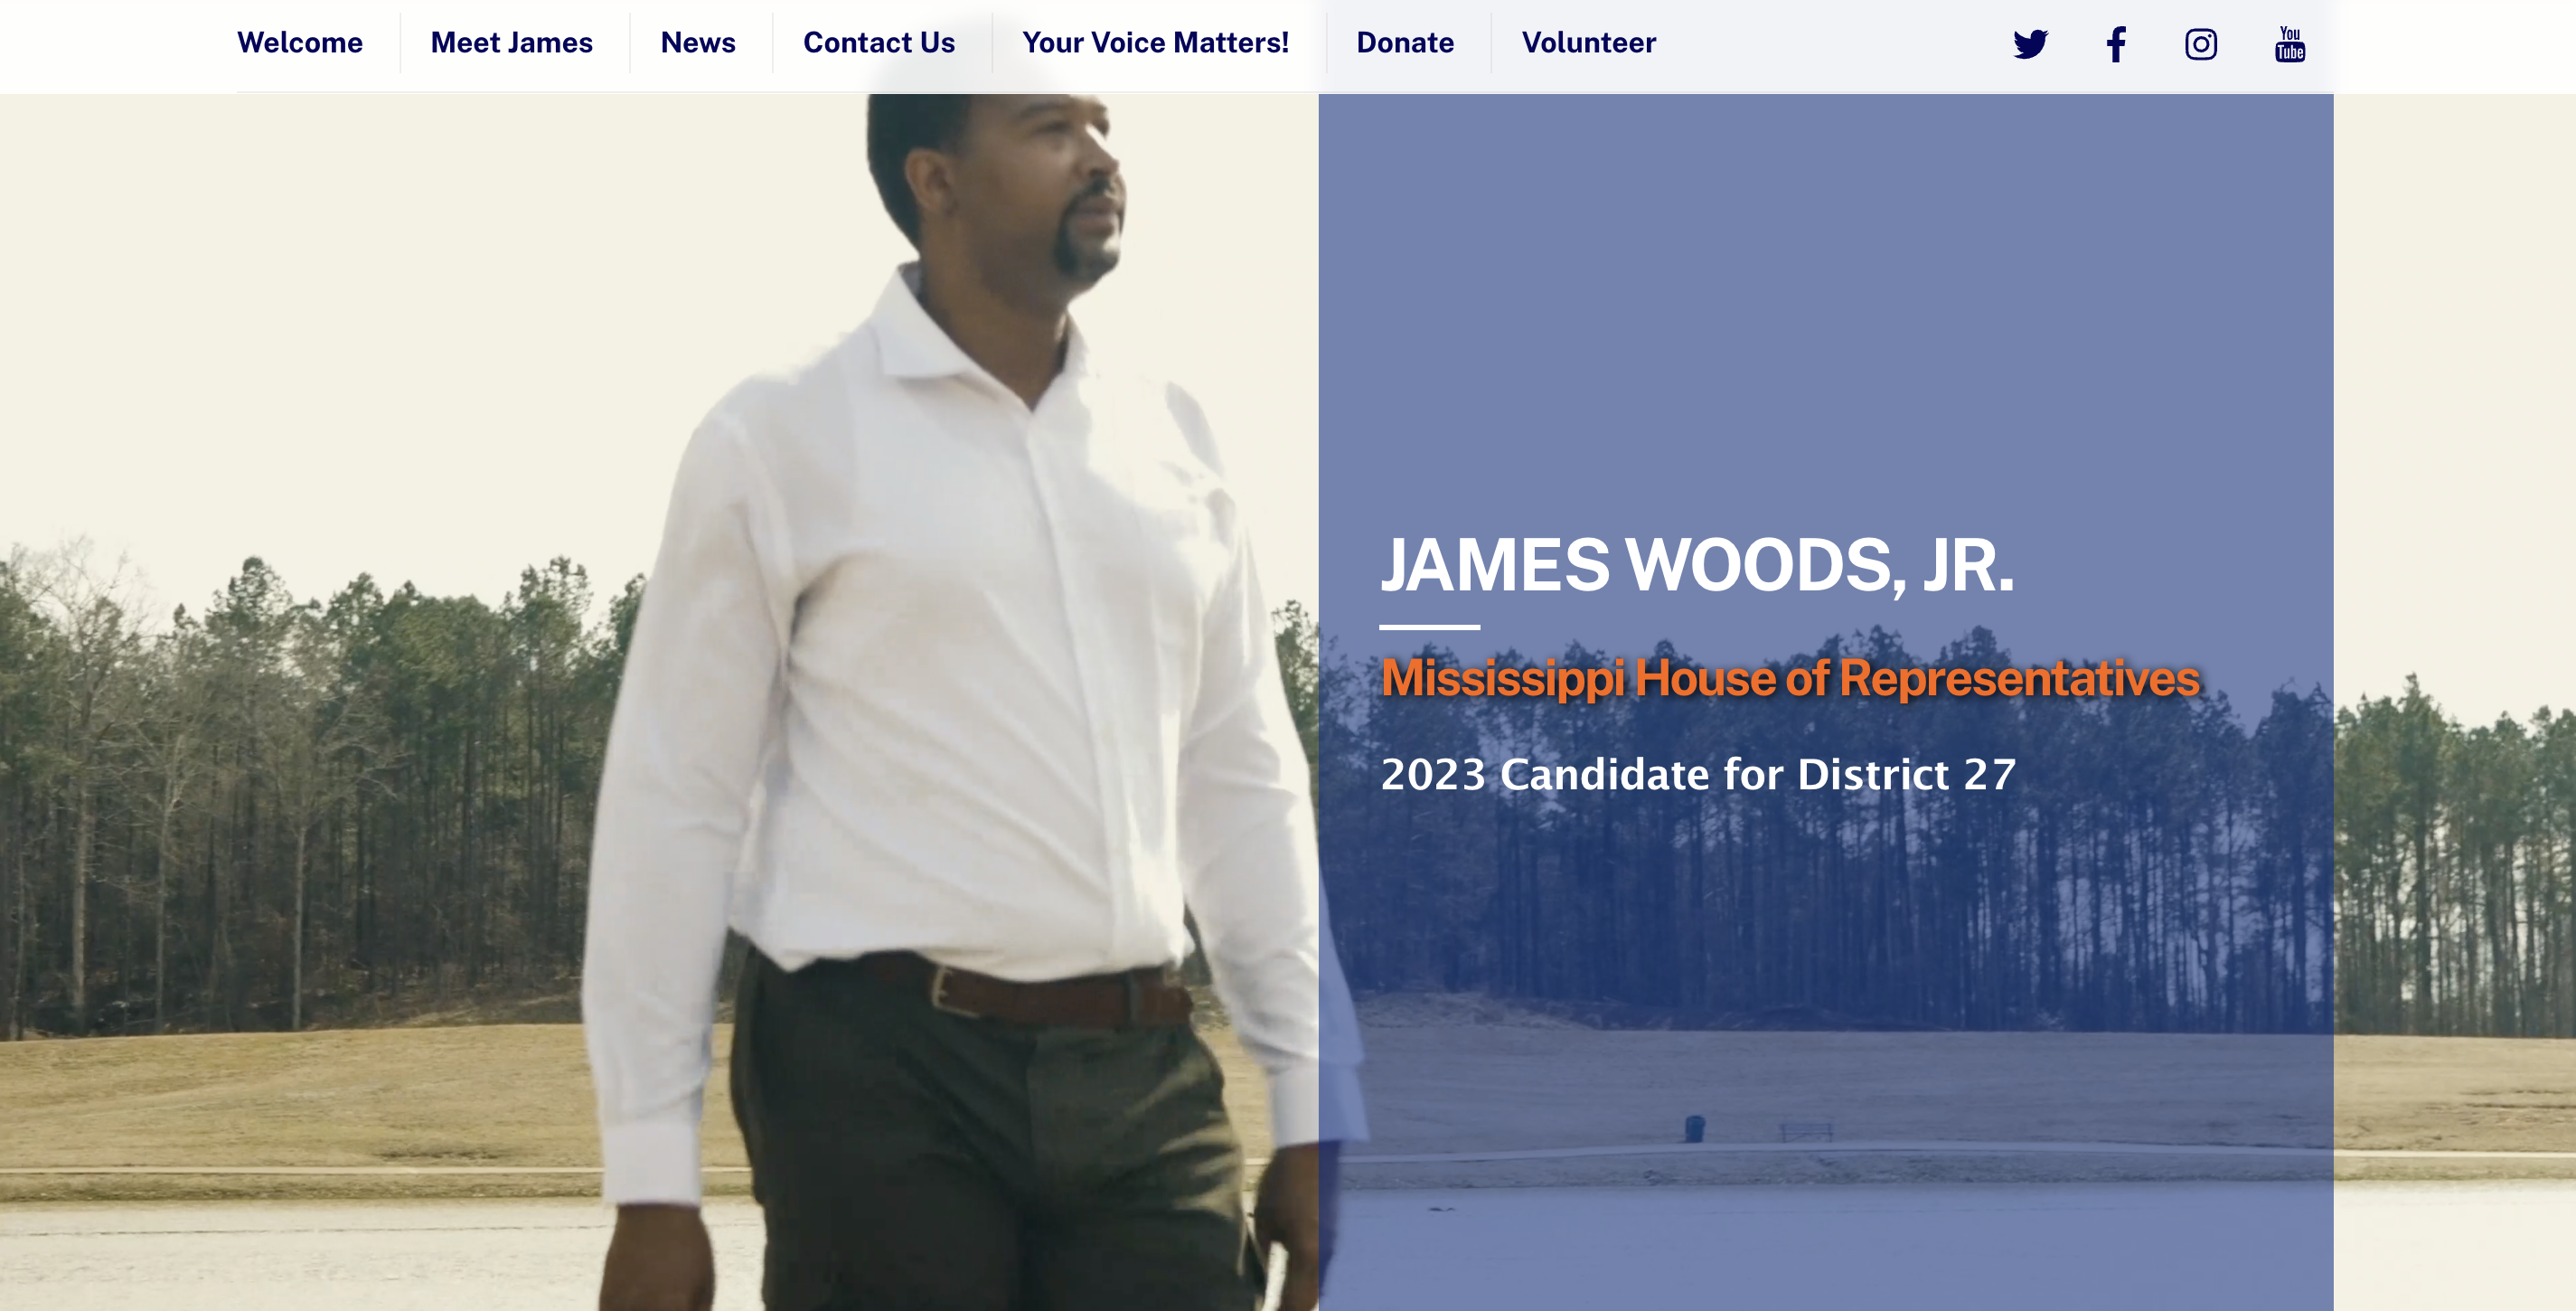 We are proud to work with James Woods Jr. campaign team to support his campaign for Mississippi House of Representatives for District 27.